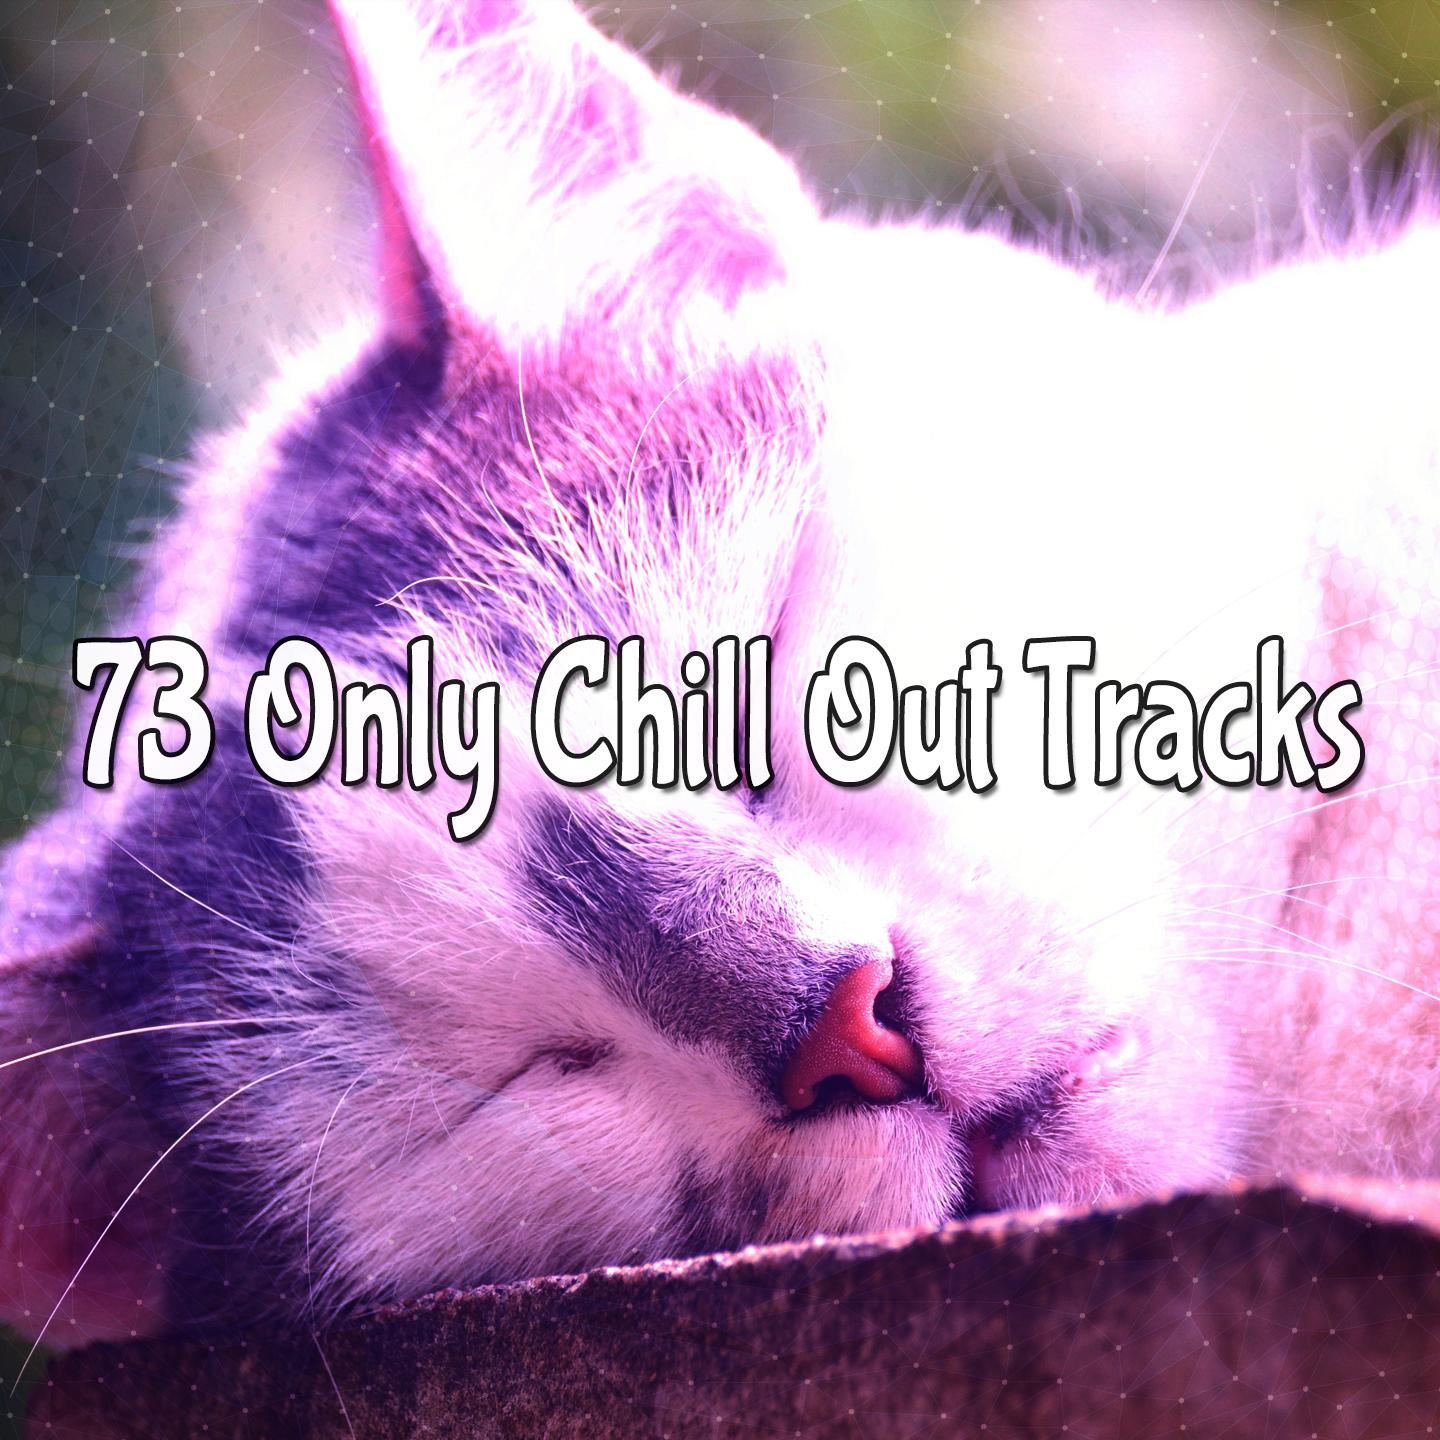 73 Only Chill Out Tracks